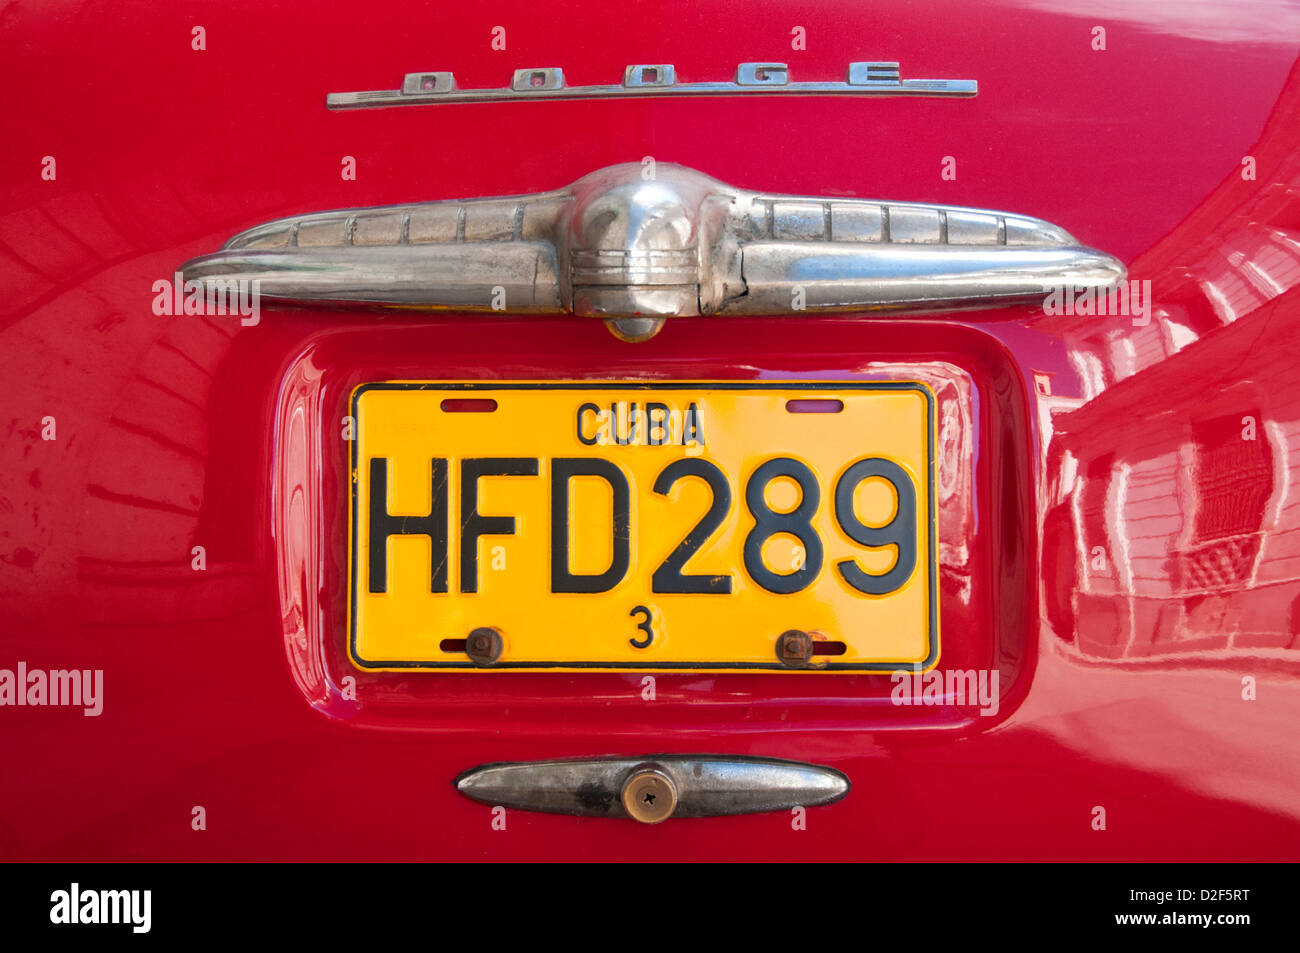 Cuban License Plate on the boot of an Old American Red Dodge Car, Havana, Cuba Stock Photo